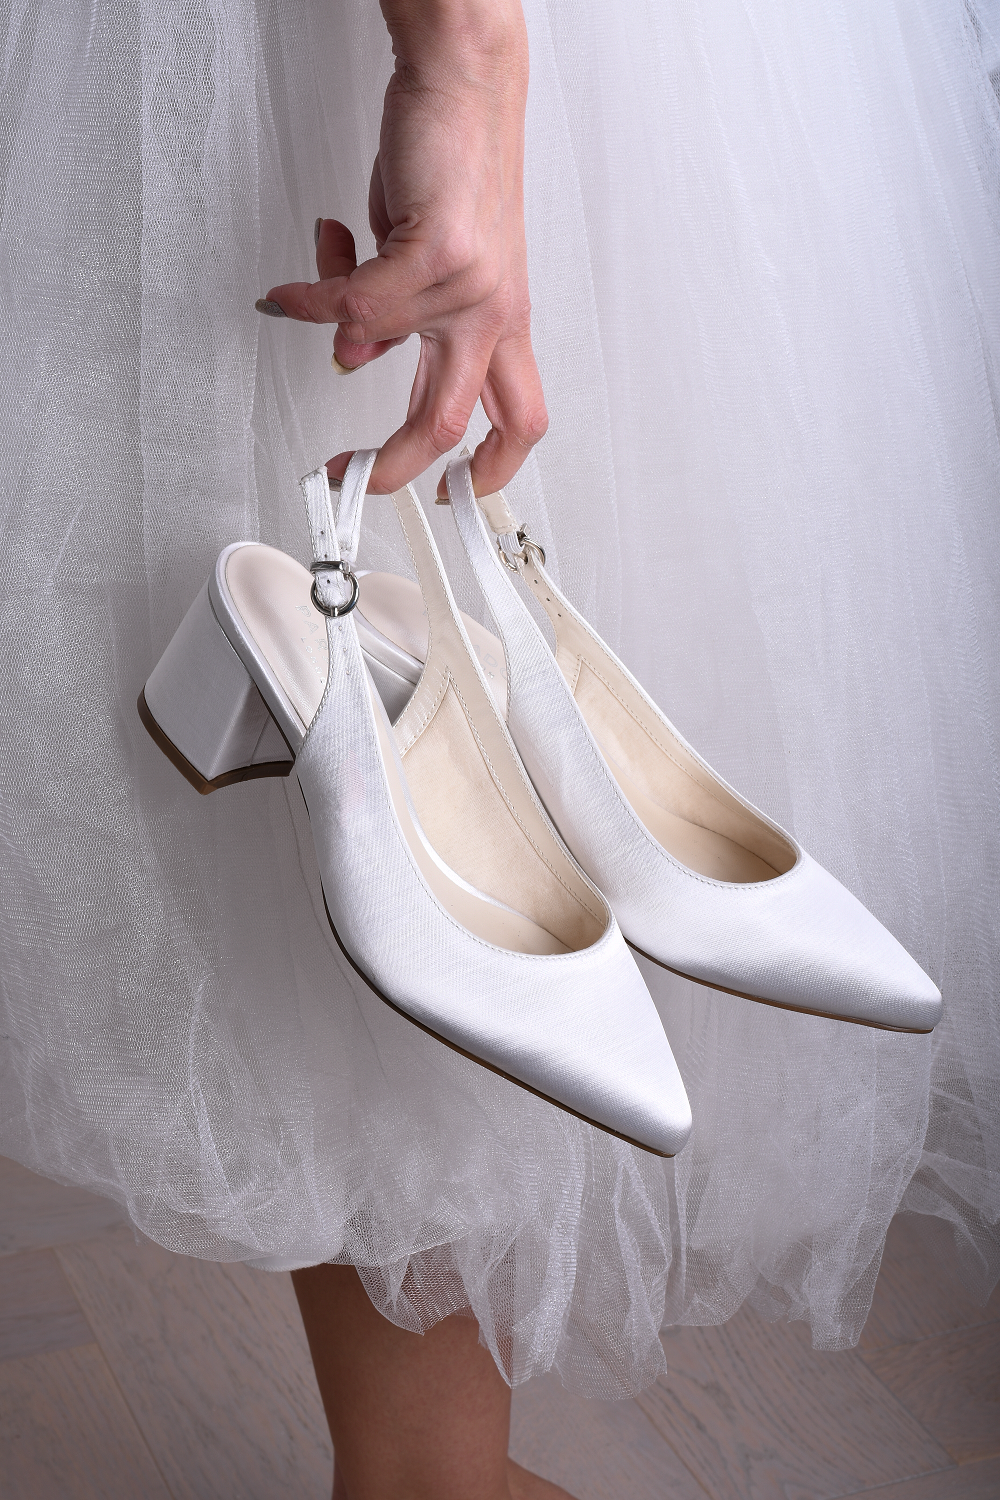 Must have wide fit wedding shoes